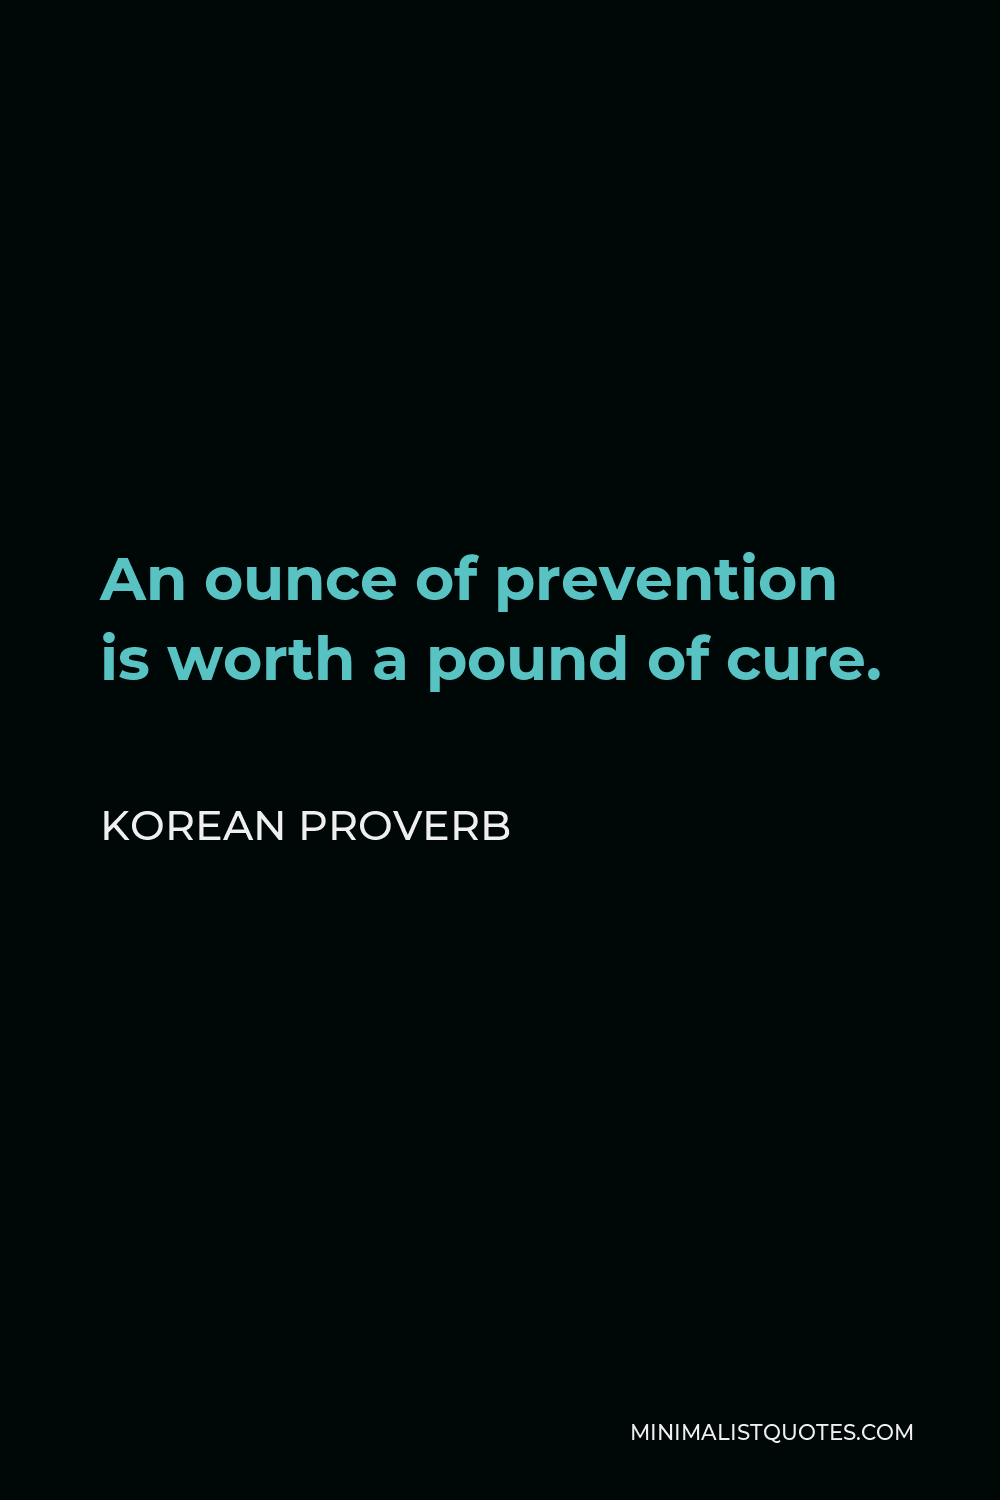 Korean Proverb Quote - An ounce of prevention is worth a pound of cure.